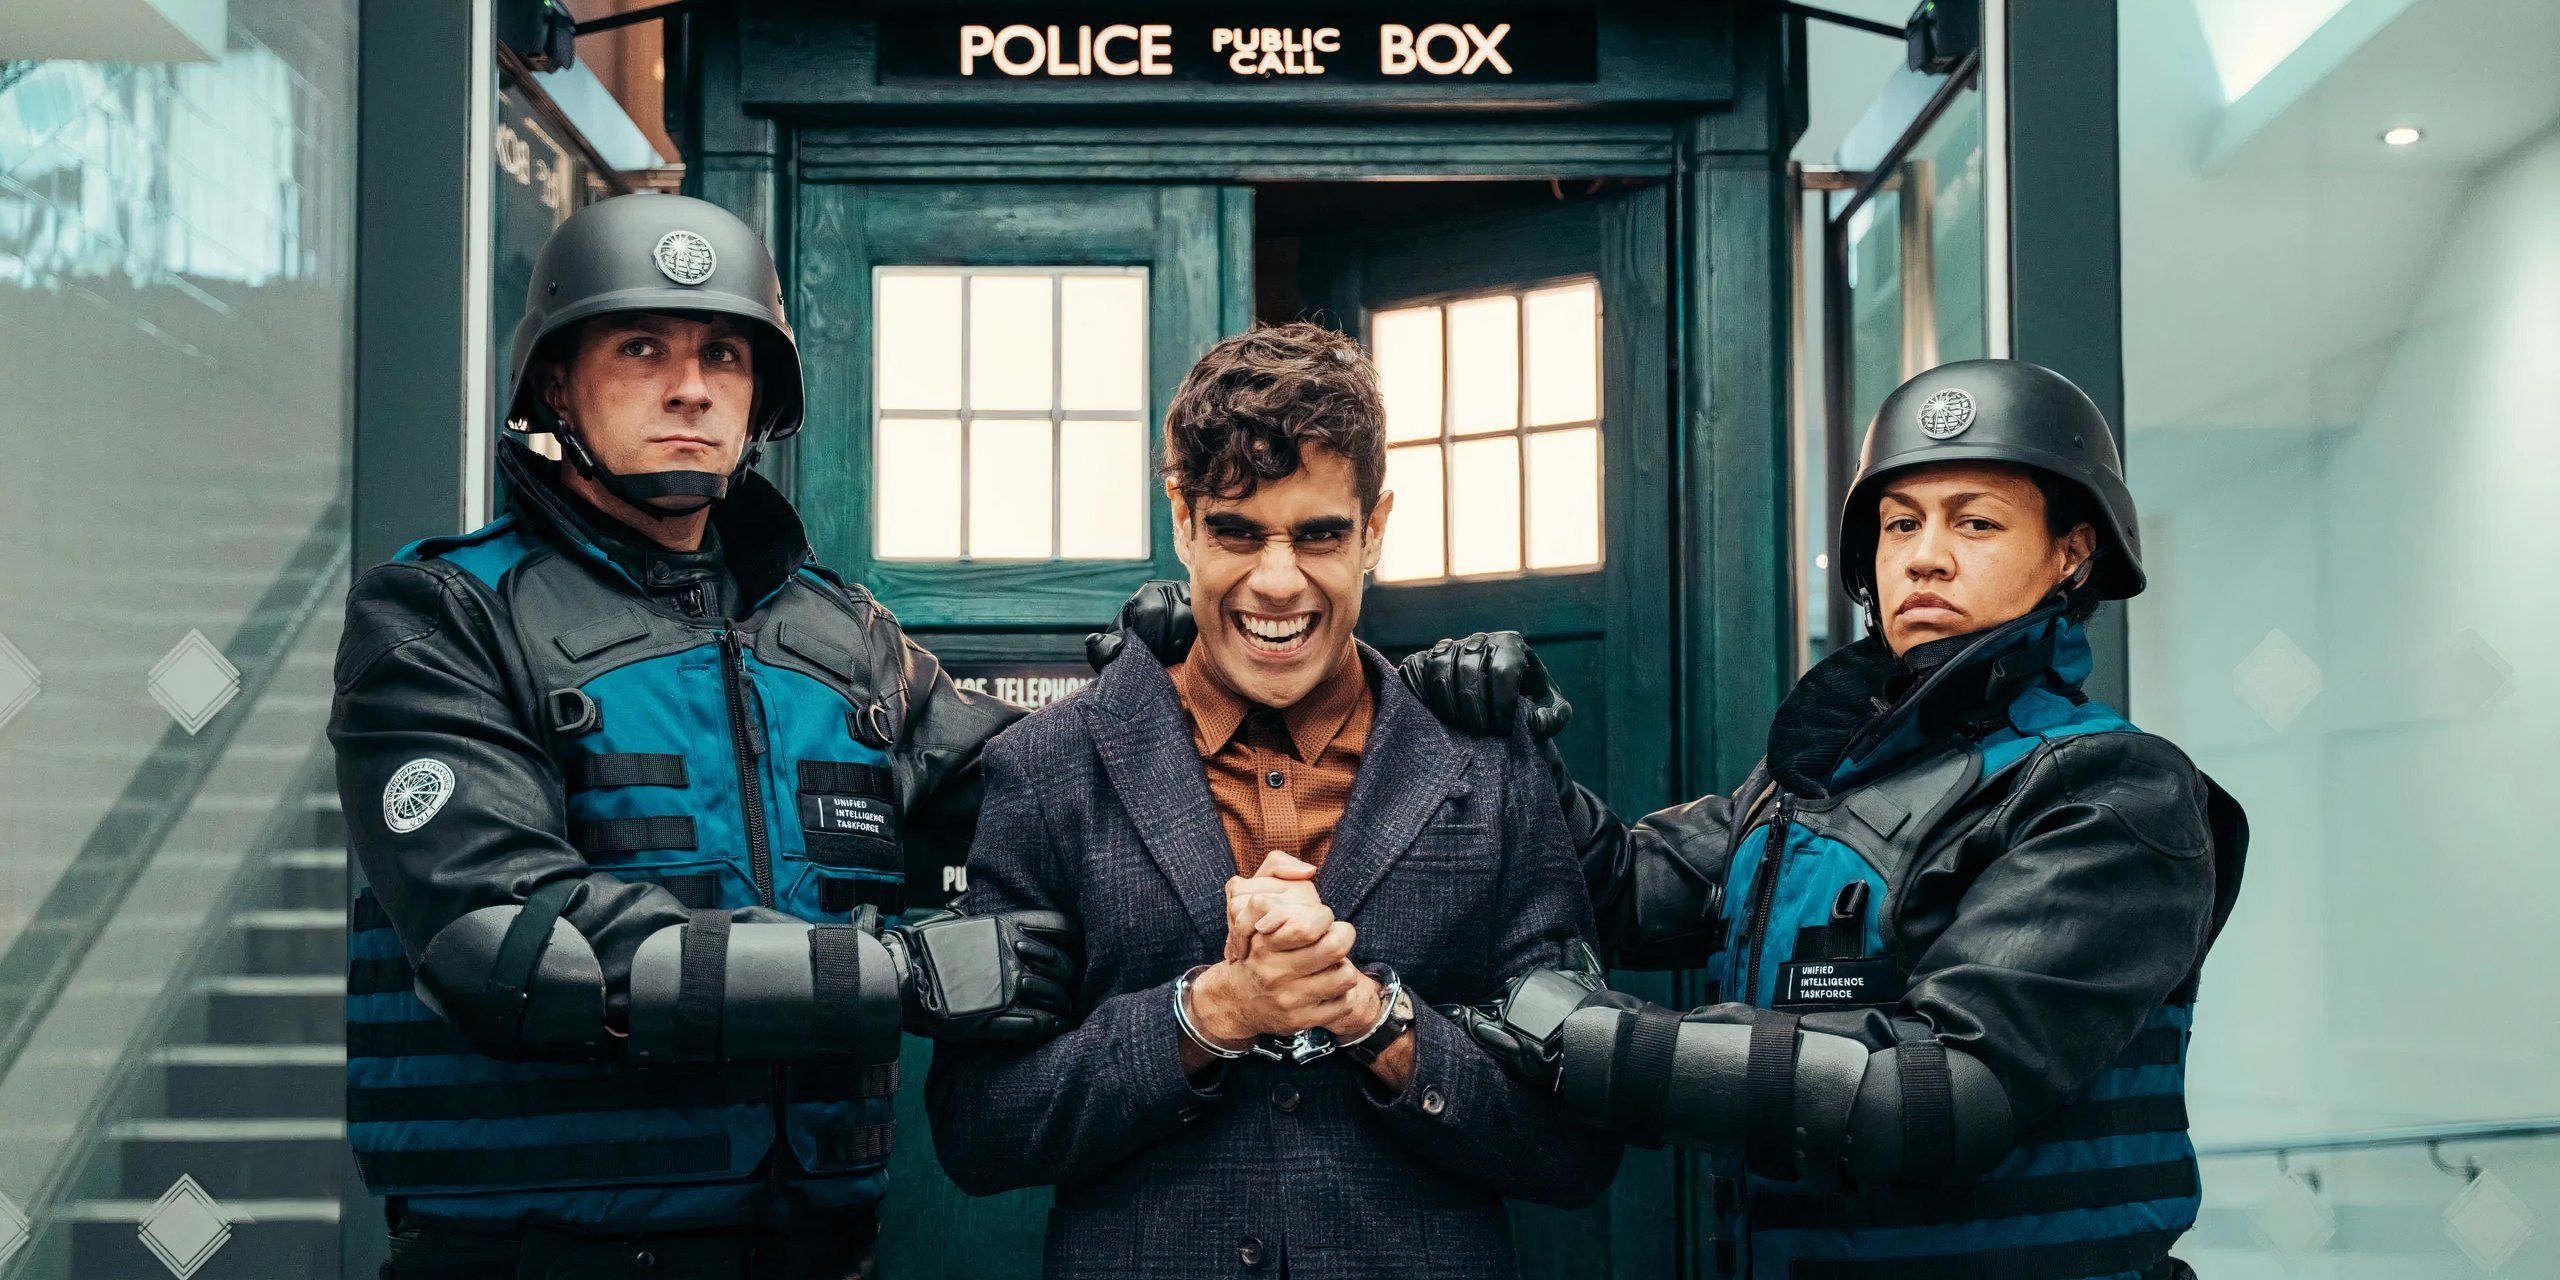 The Master being arrested outside the TARDIS, smiling